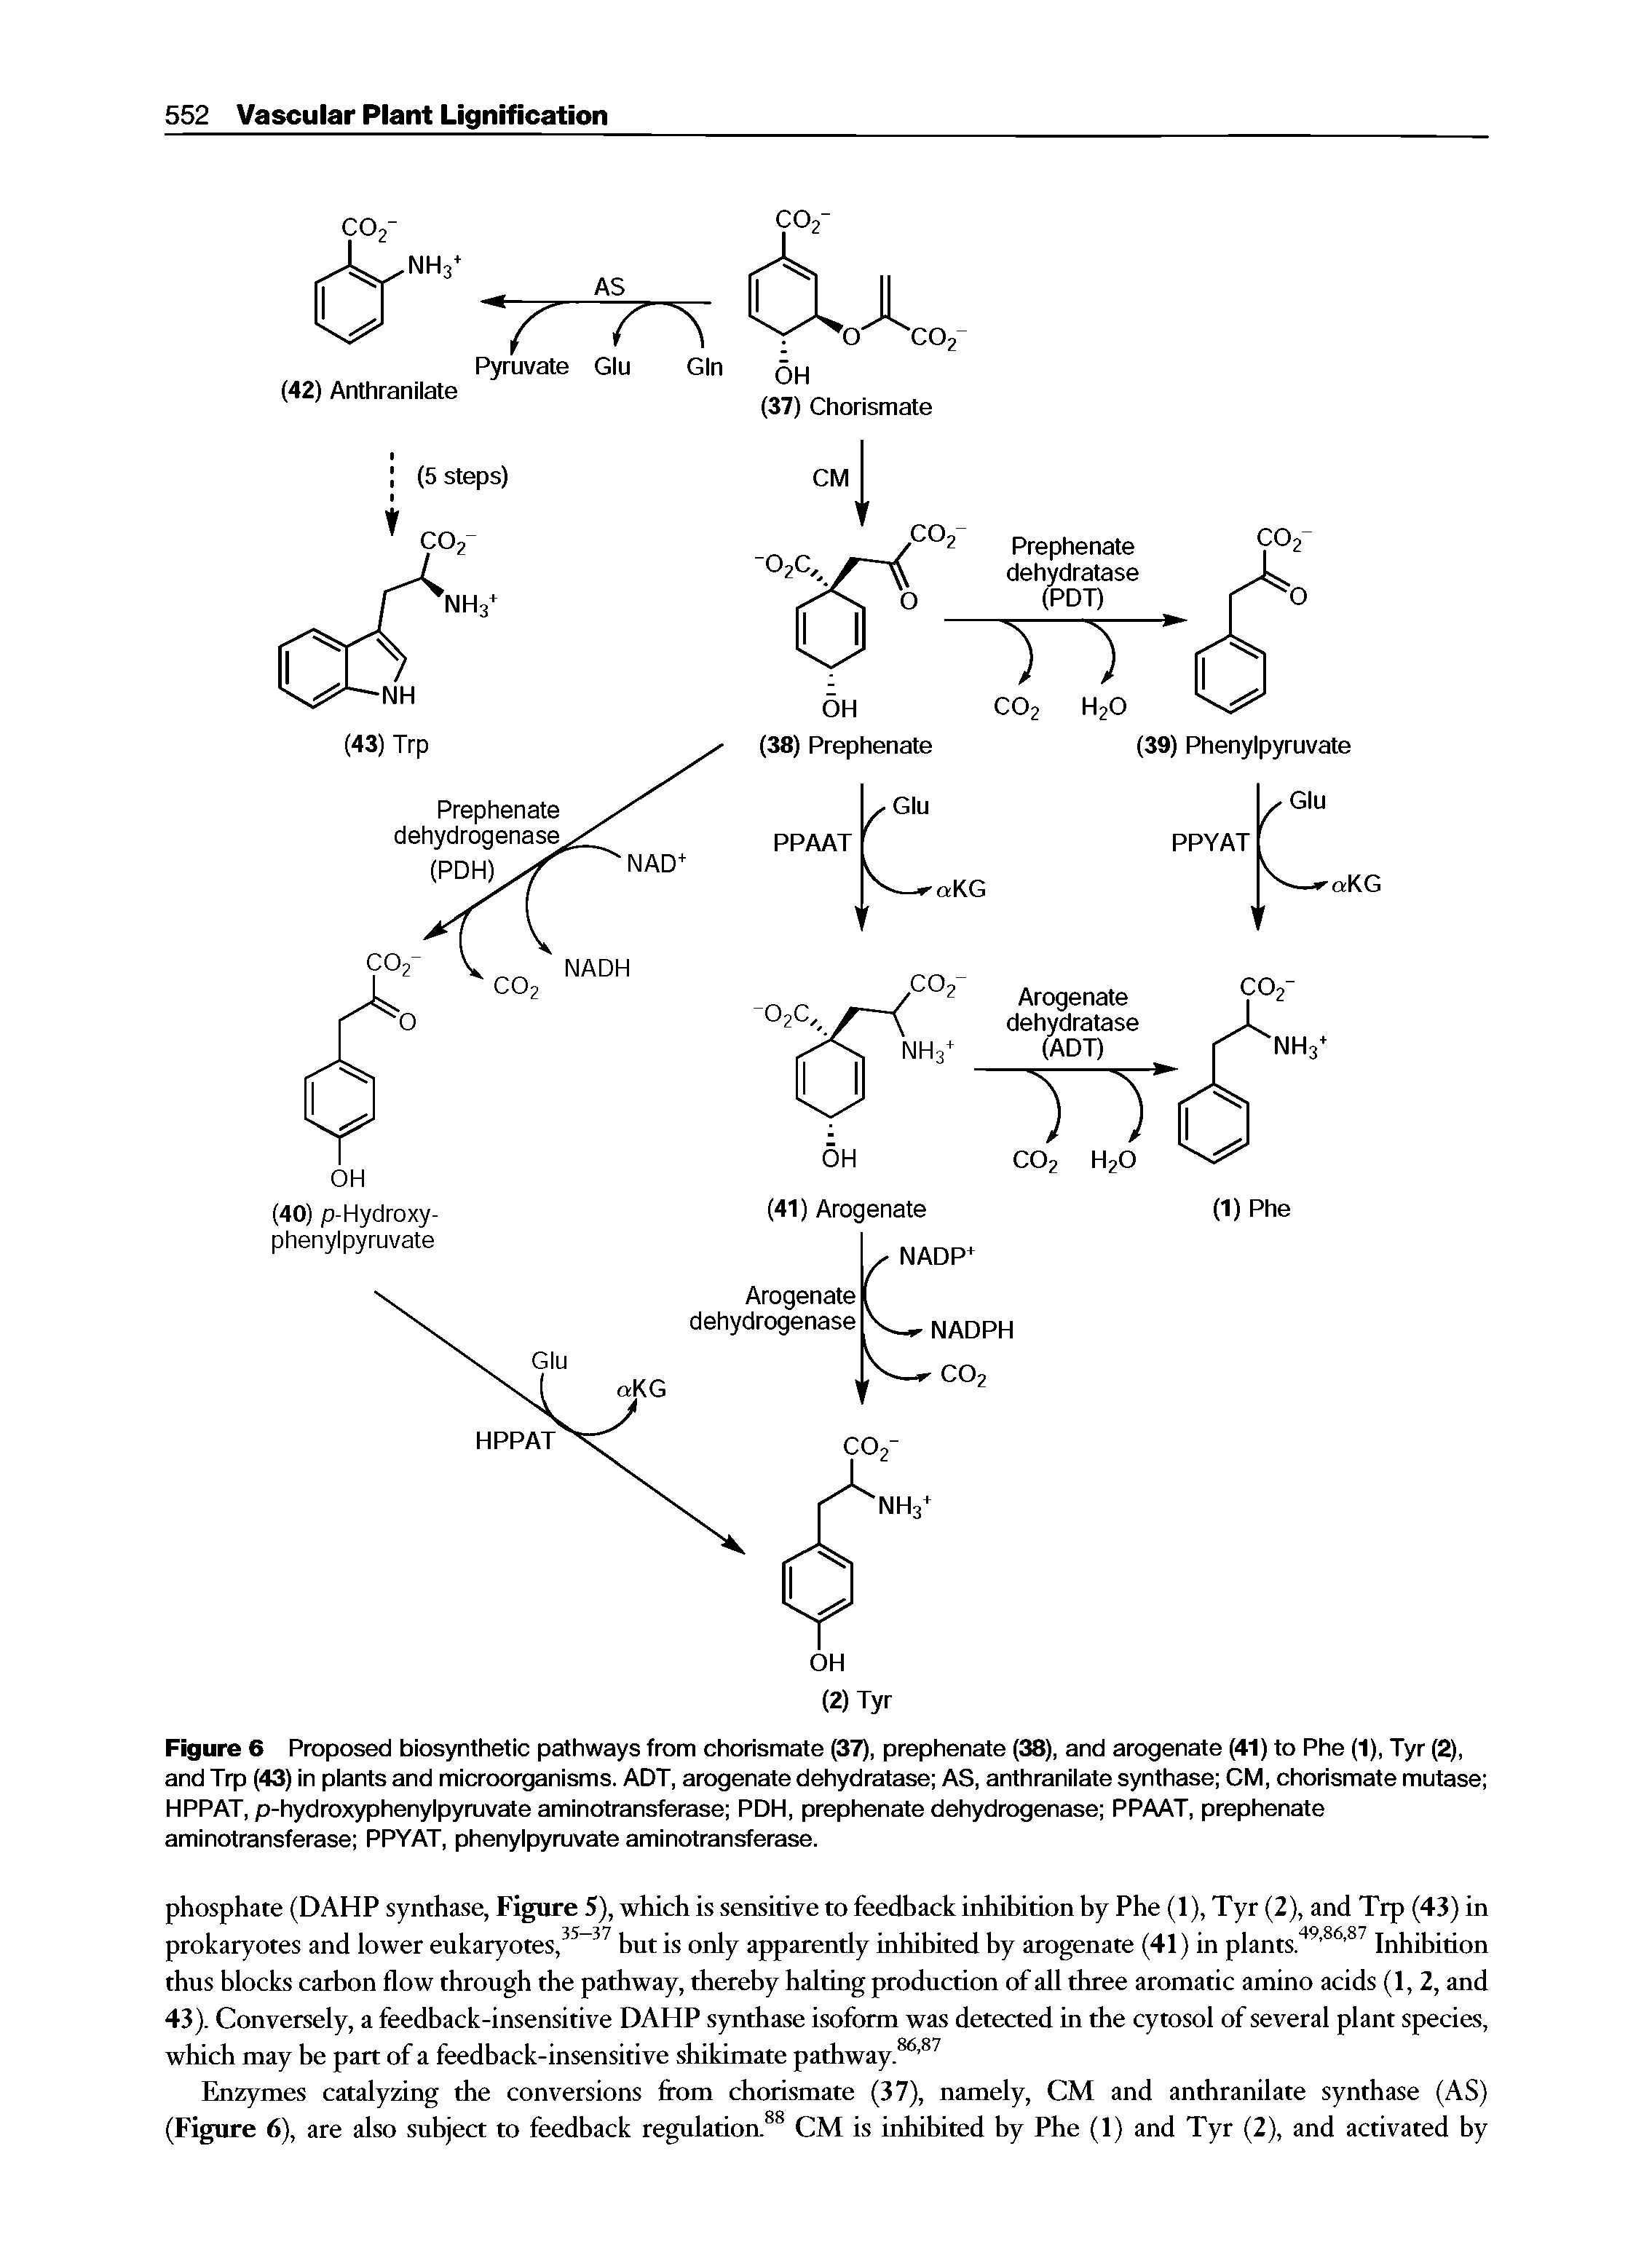 Figure 6 Proposed biosynthetic pathways from chorismate (37), prephenate (38), and arogenate (41) to Phe (1), Tyr (2), and Trp (43) in plants and microorganisms. ADT, arogenate dehydratase AS, anthranilate synthase CM, chorismate mutase HPPAT, p-hydroxyphenylpyruvate aminotransferase PDH, prephenate dehydrogenase PPAAT, prephenate aminotransferase PPYAT, phenylpyruvate aminotransferase.